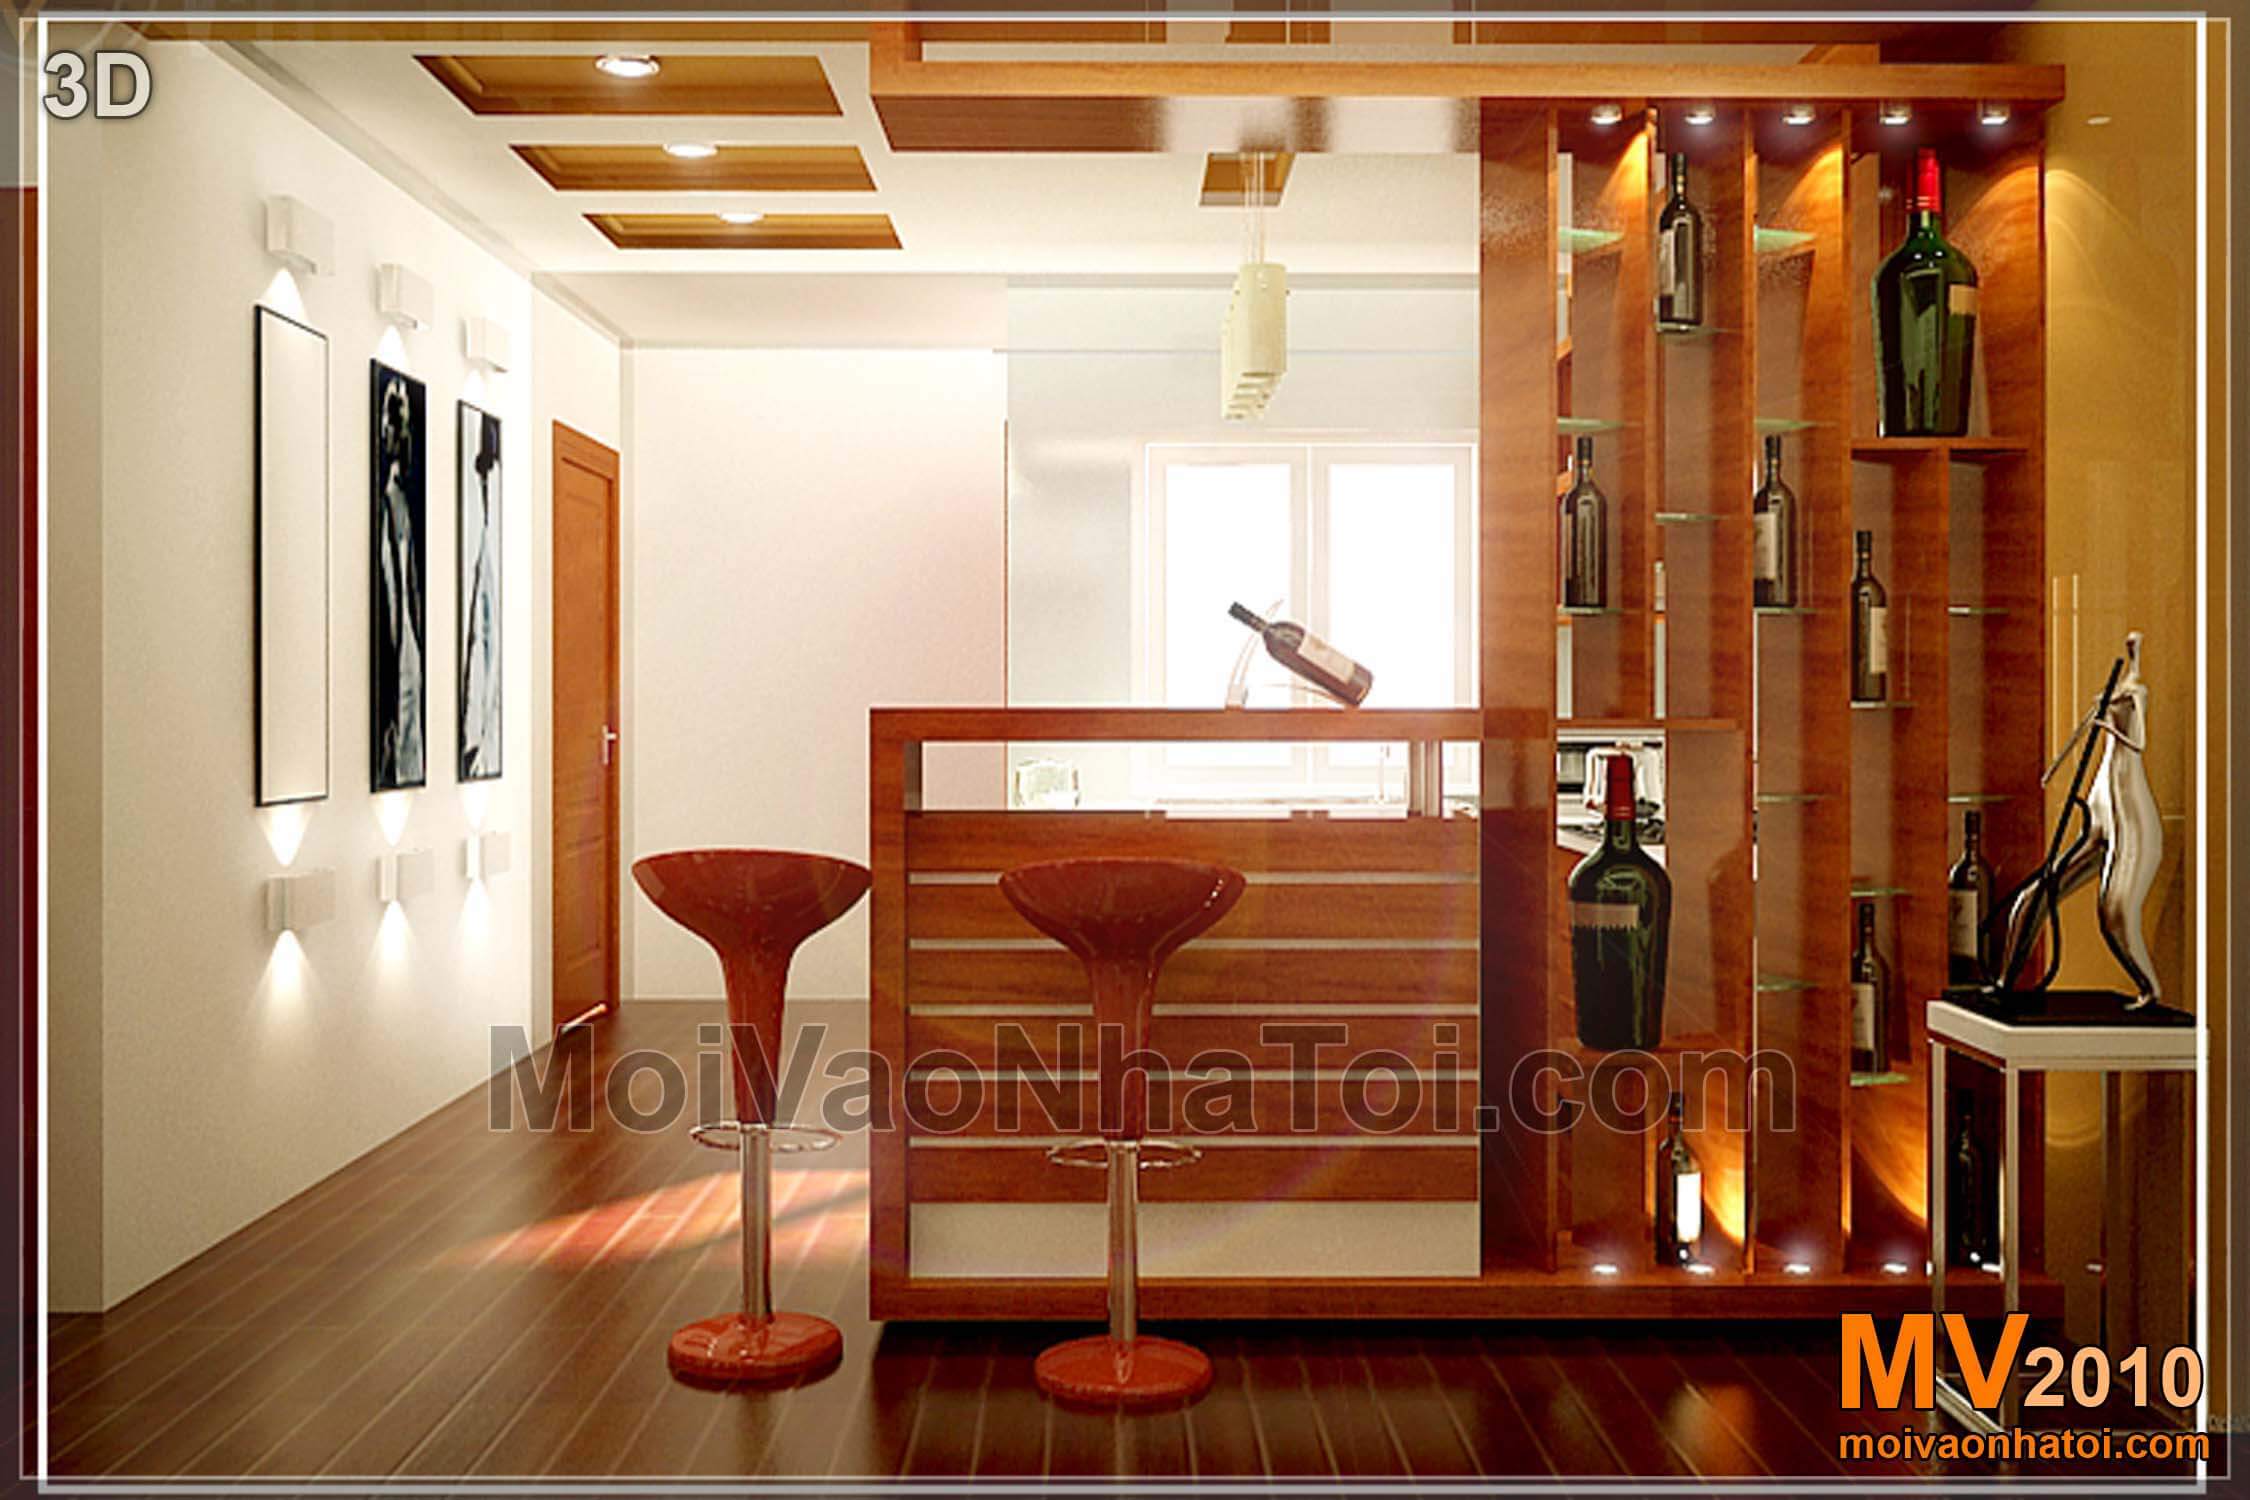 3b Viet Hung living room partition